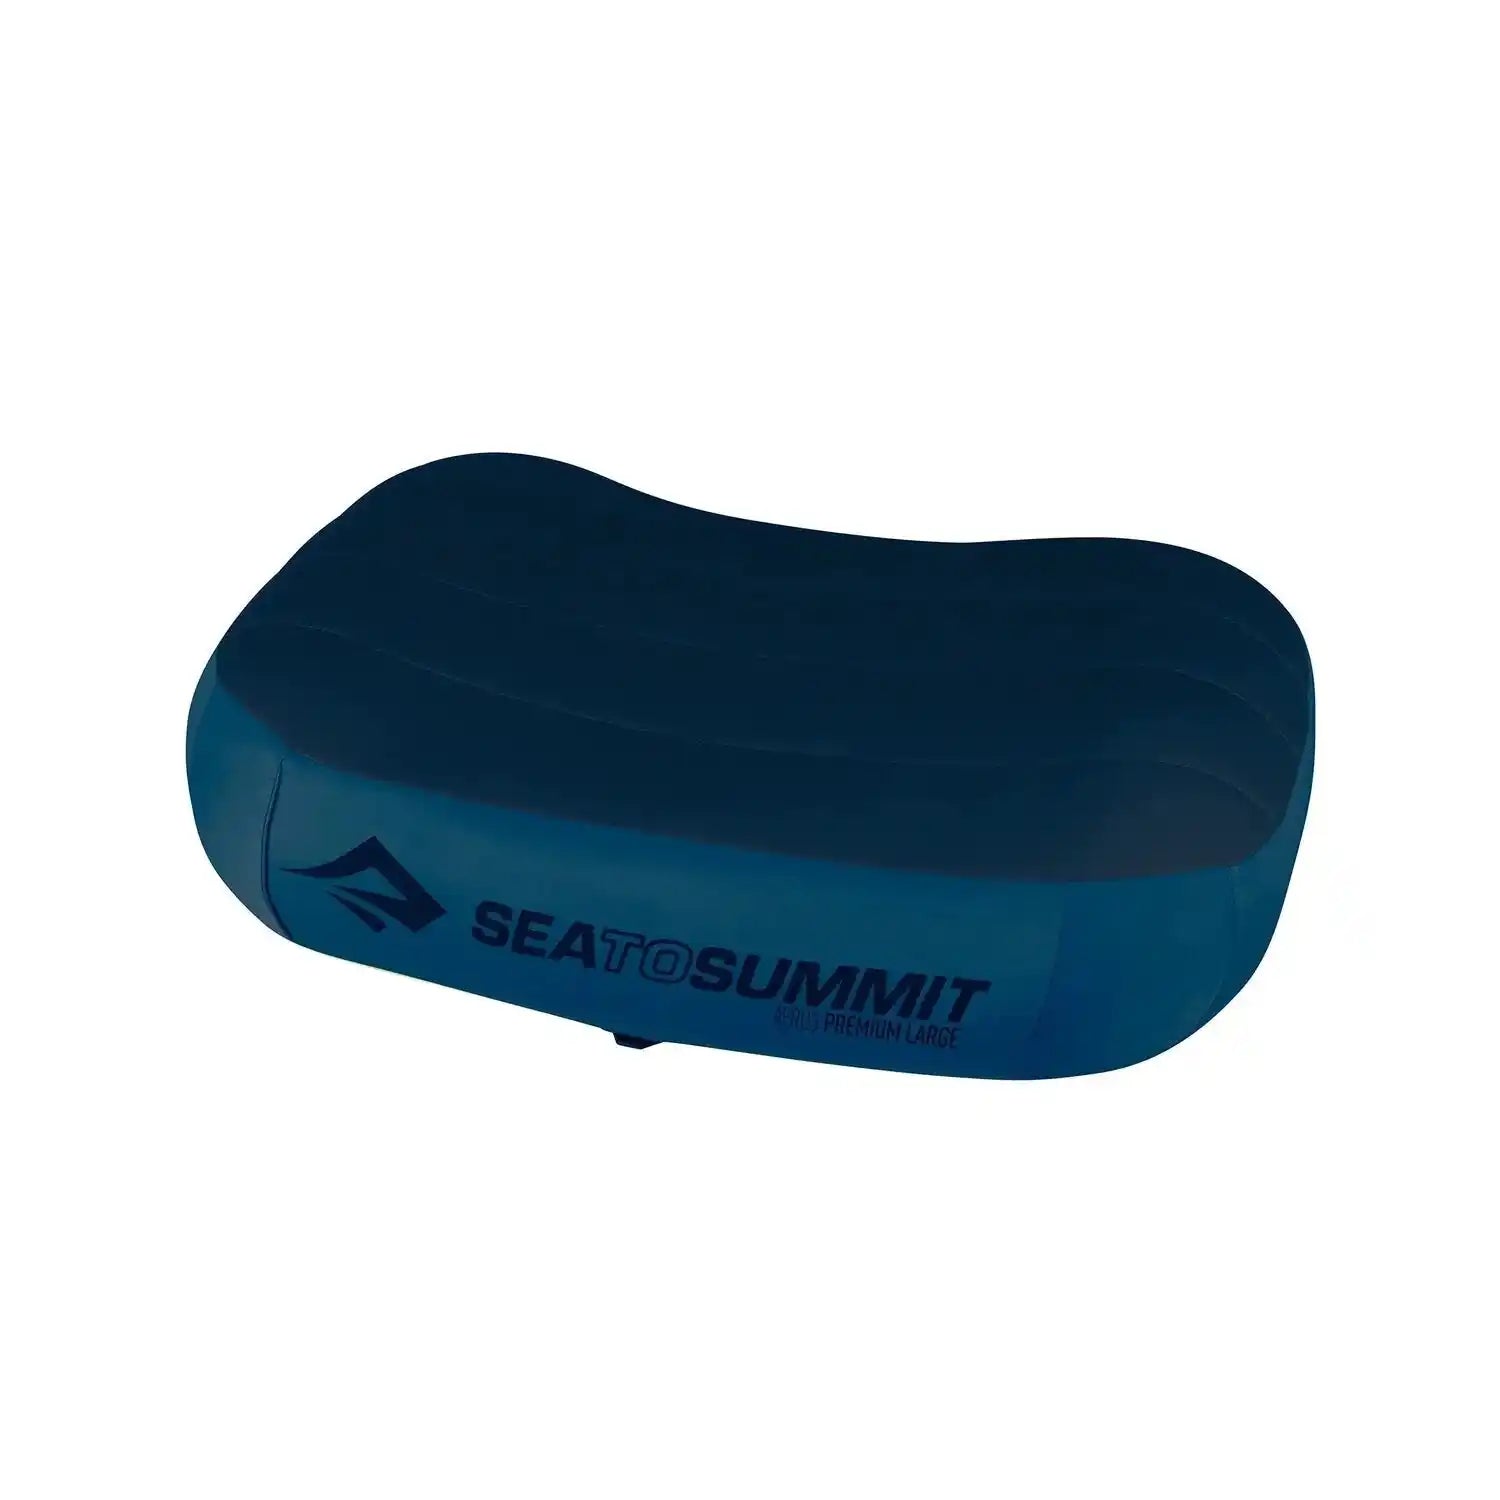 Sea to Summit Aeros Premium Pillow, Navy Blue, front and top view 